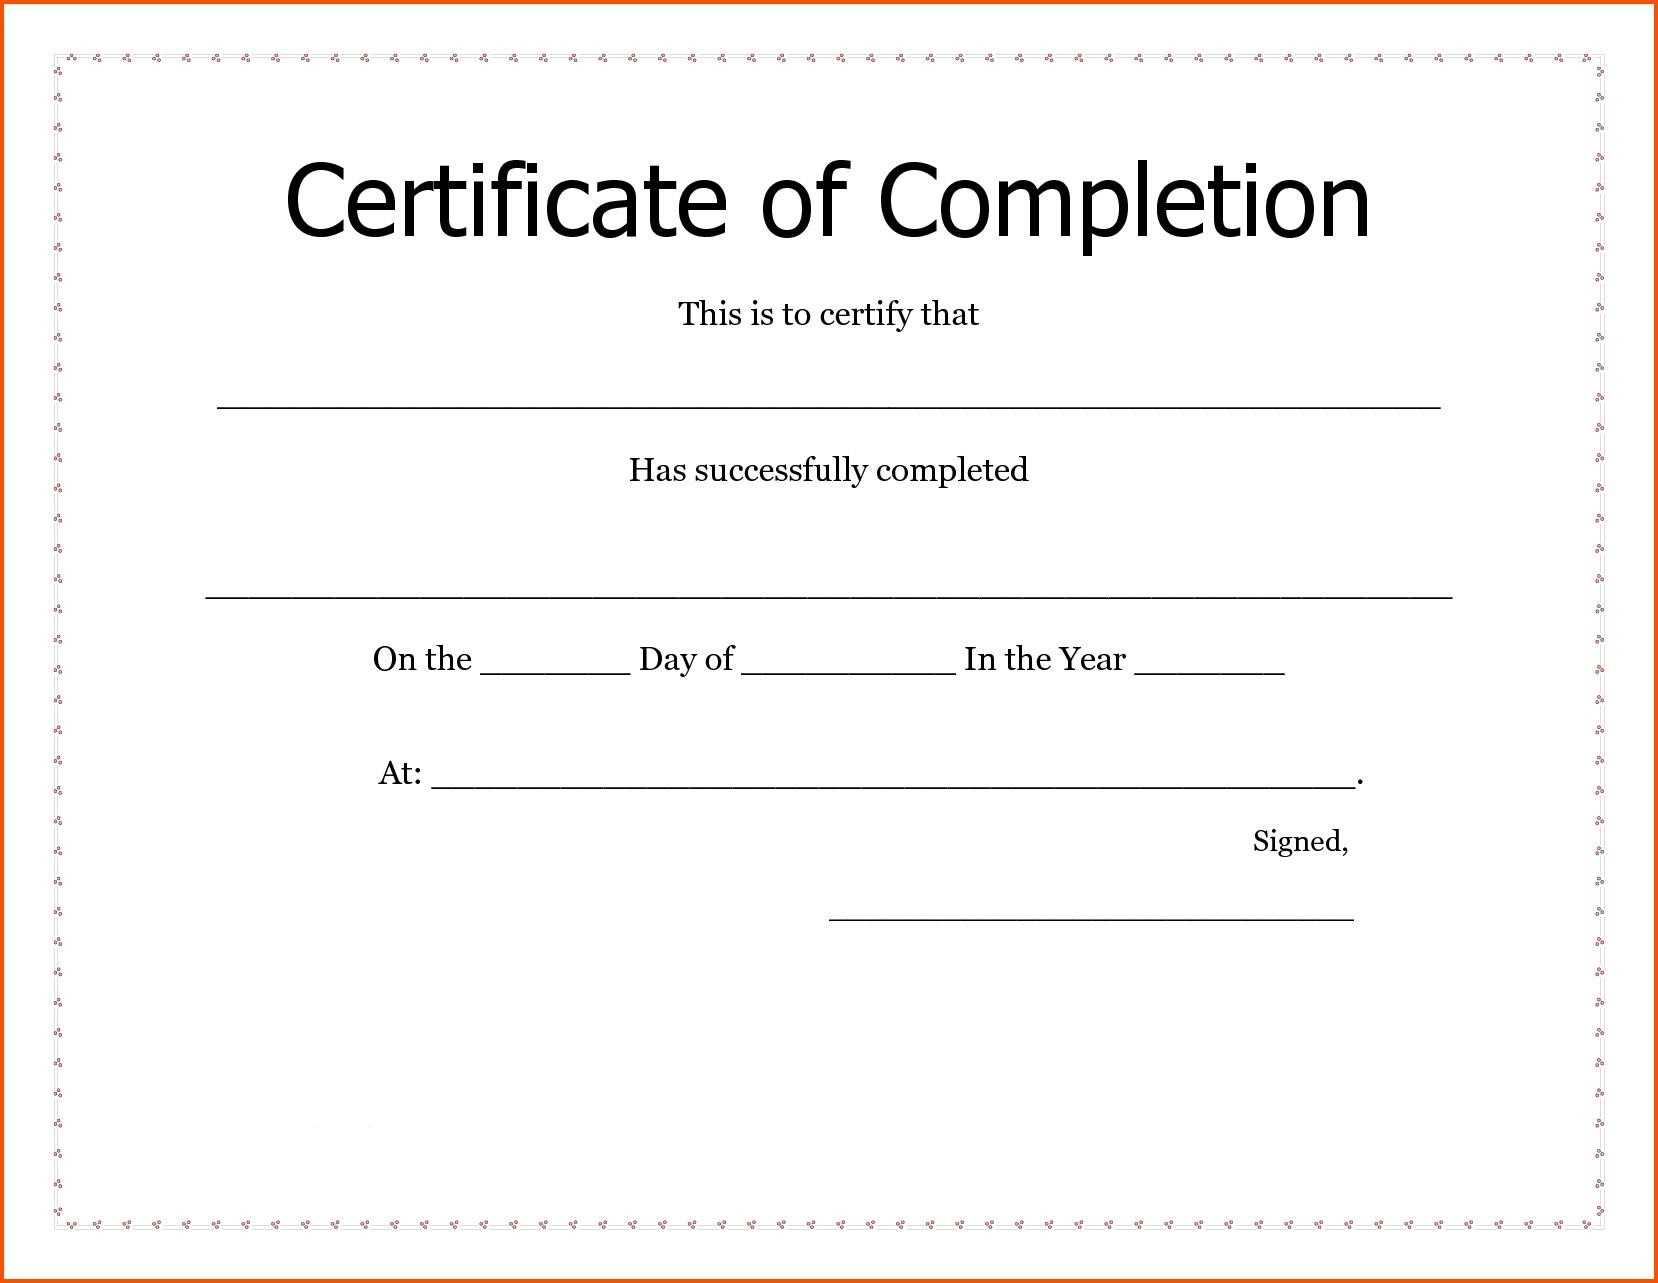 Certificates. New Certificate Of Completion Template Word With Regard To Certificate Of Completion Word Template